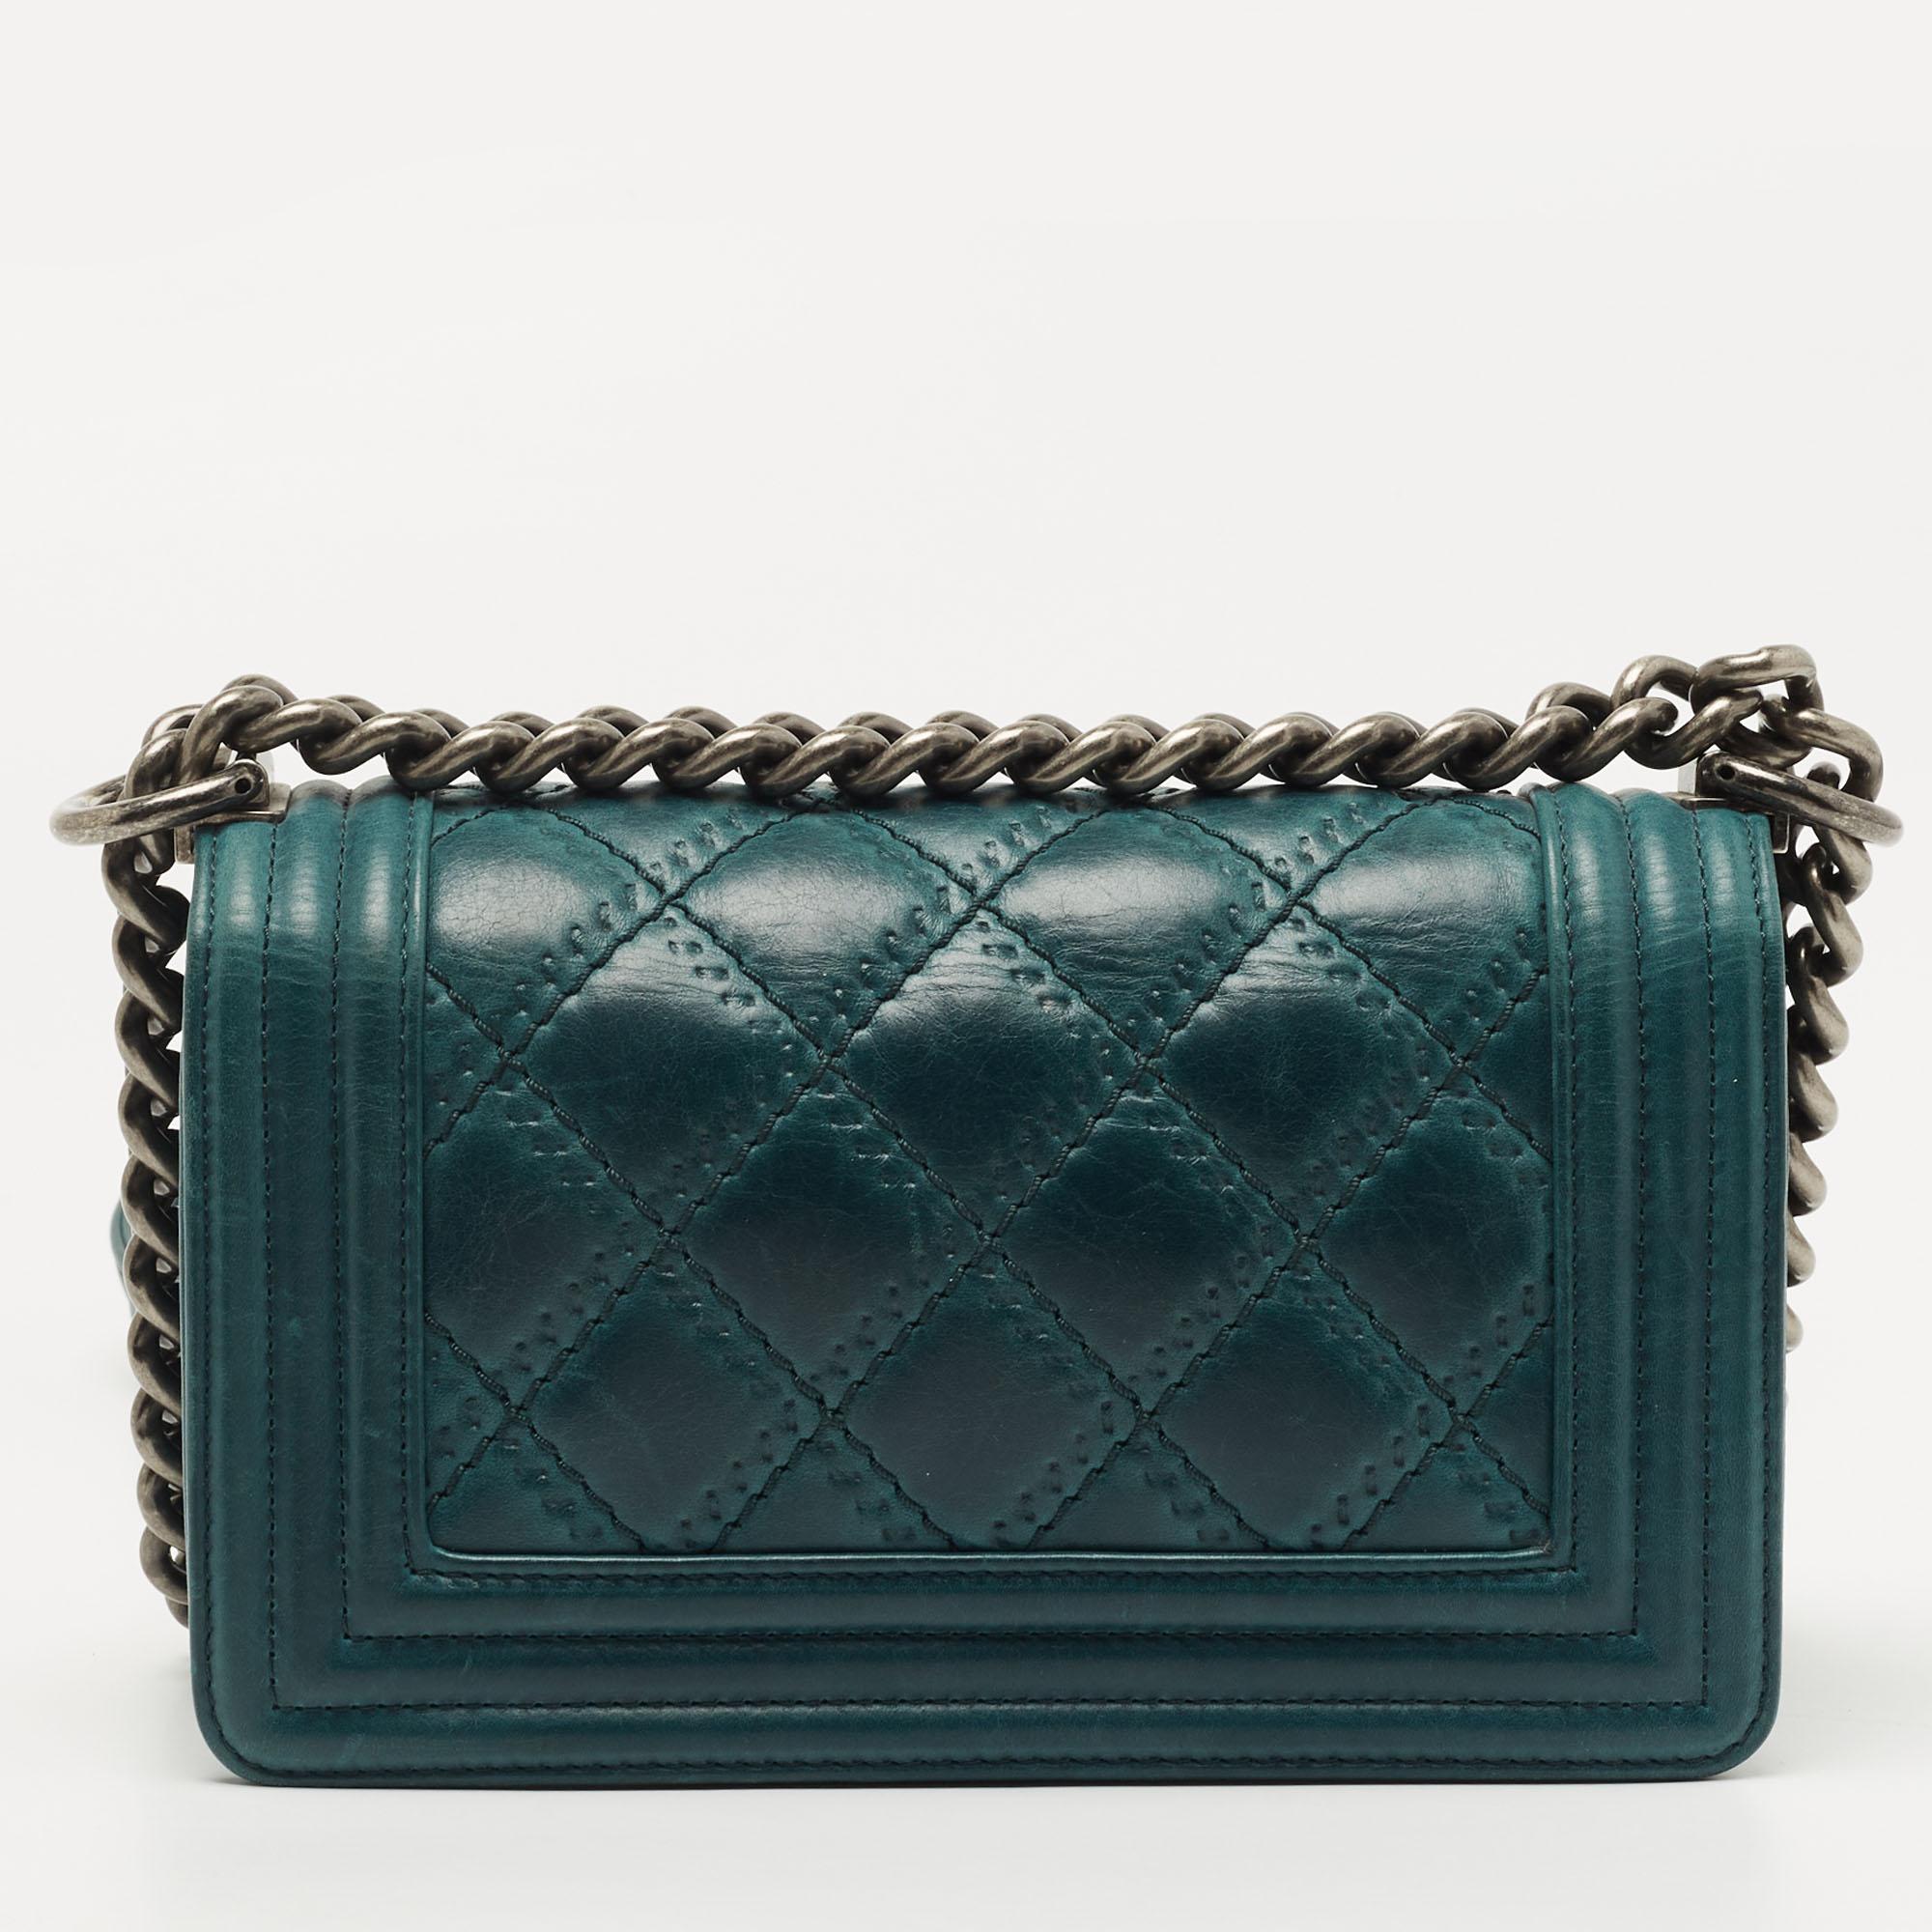 The Boy flap bag is an icon of Chanel's. Here is a version in green leather. It brings the signature label within the fabric interior and the iconic CC push lock on the flap. The piece has dark ruthenium hardware and a shoulder chain link to place